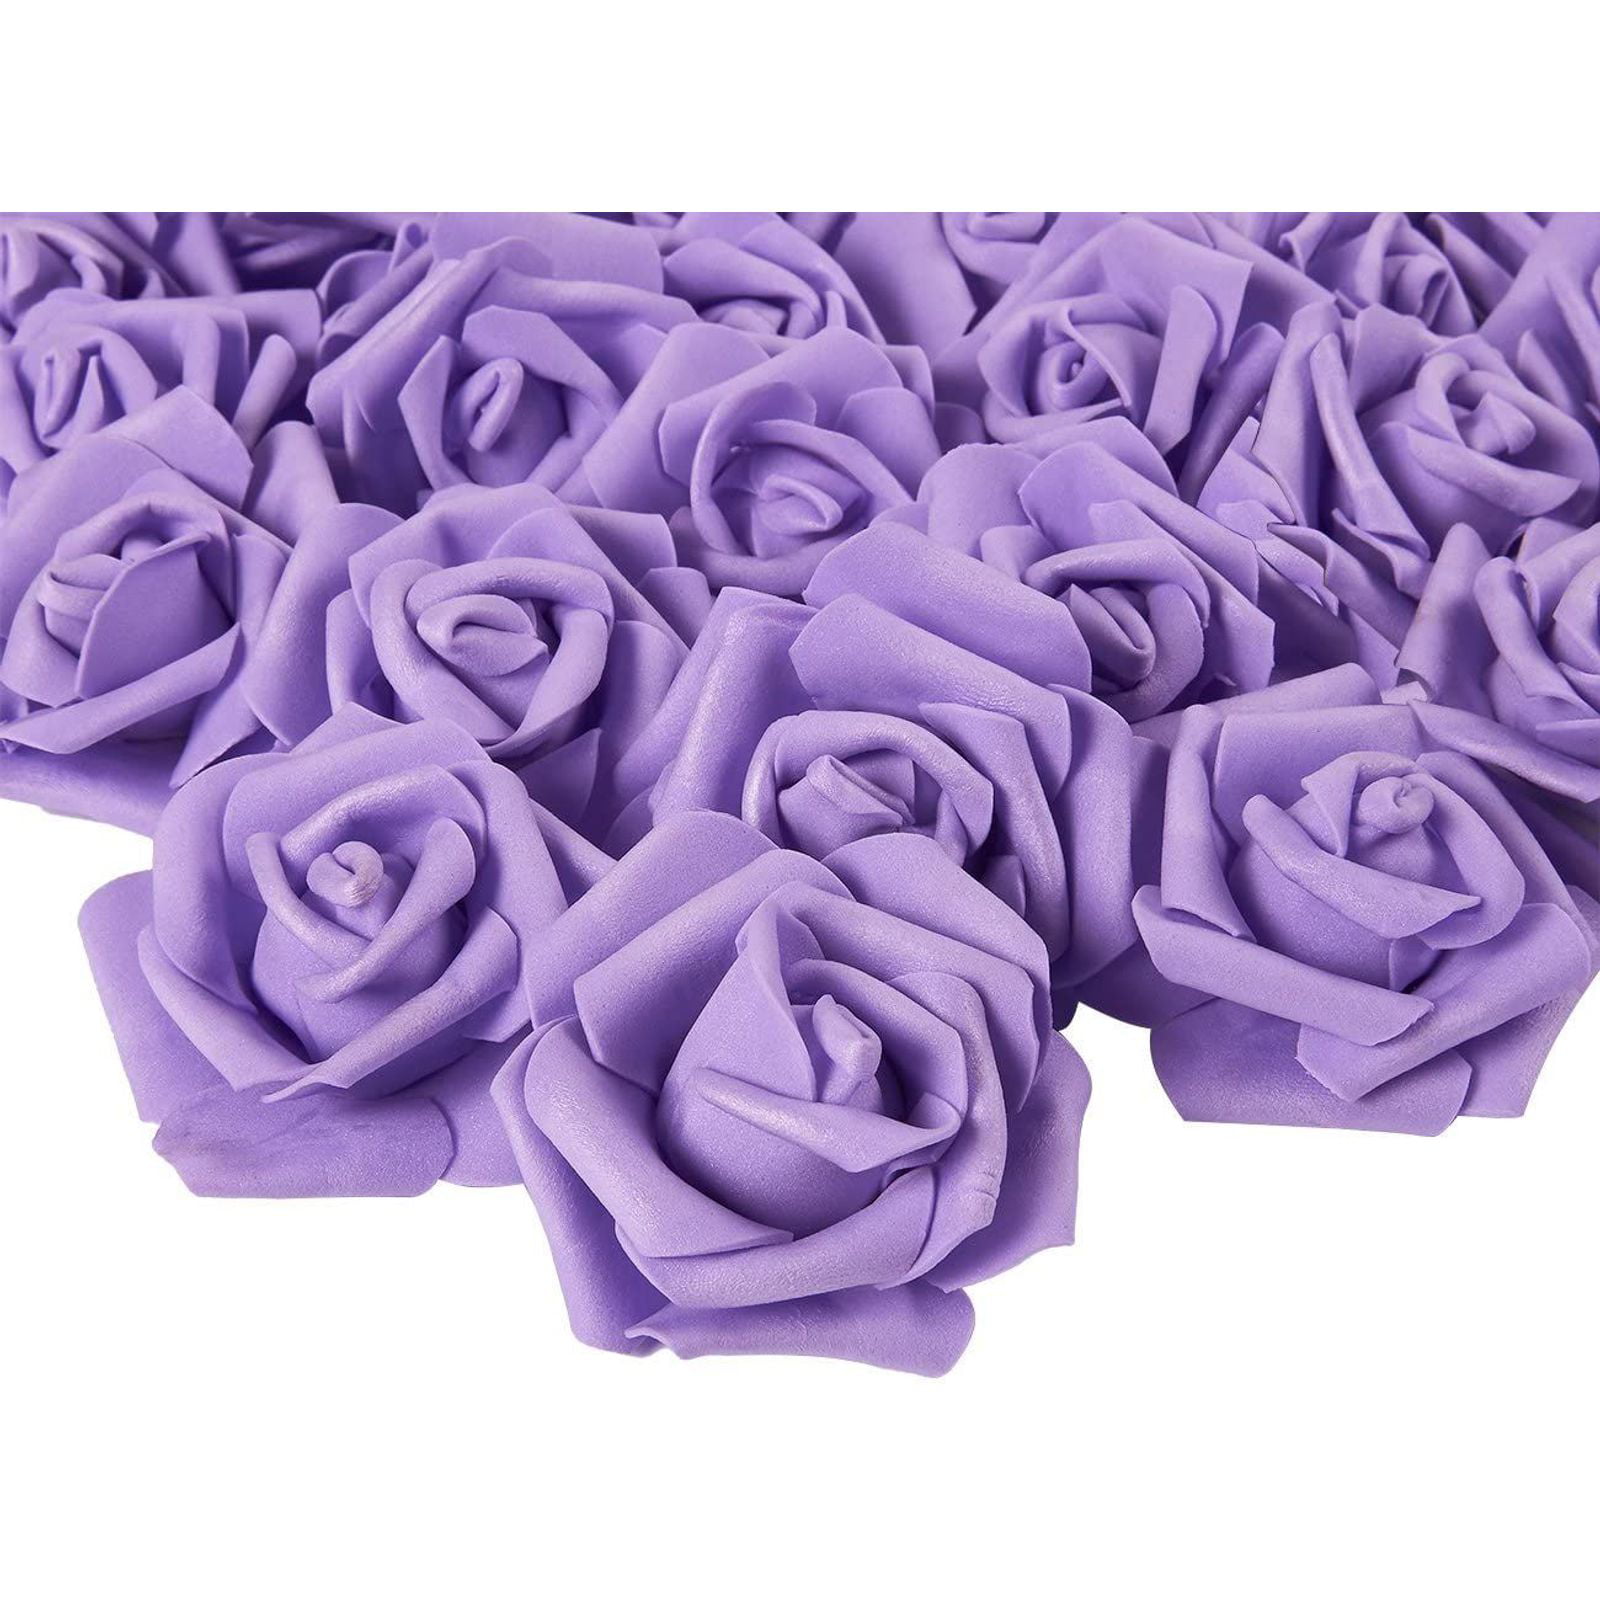 QUALITY 3 cm Mini Artificial ROSE FLOWER HEADS For Weddings Craft Decorations UK 